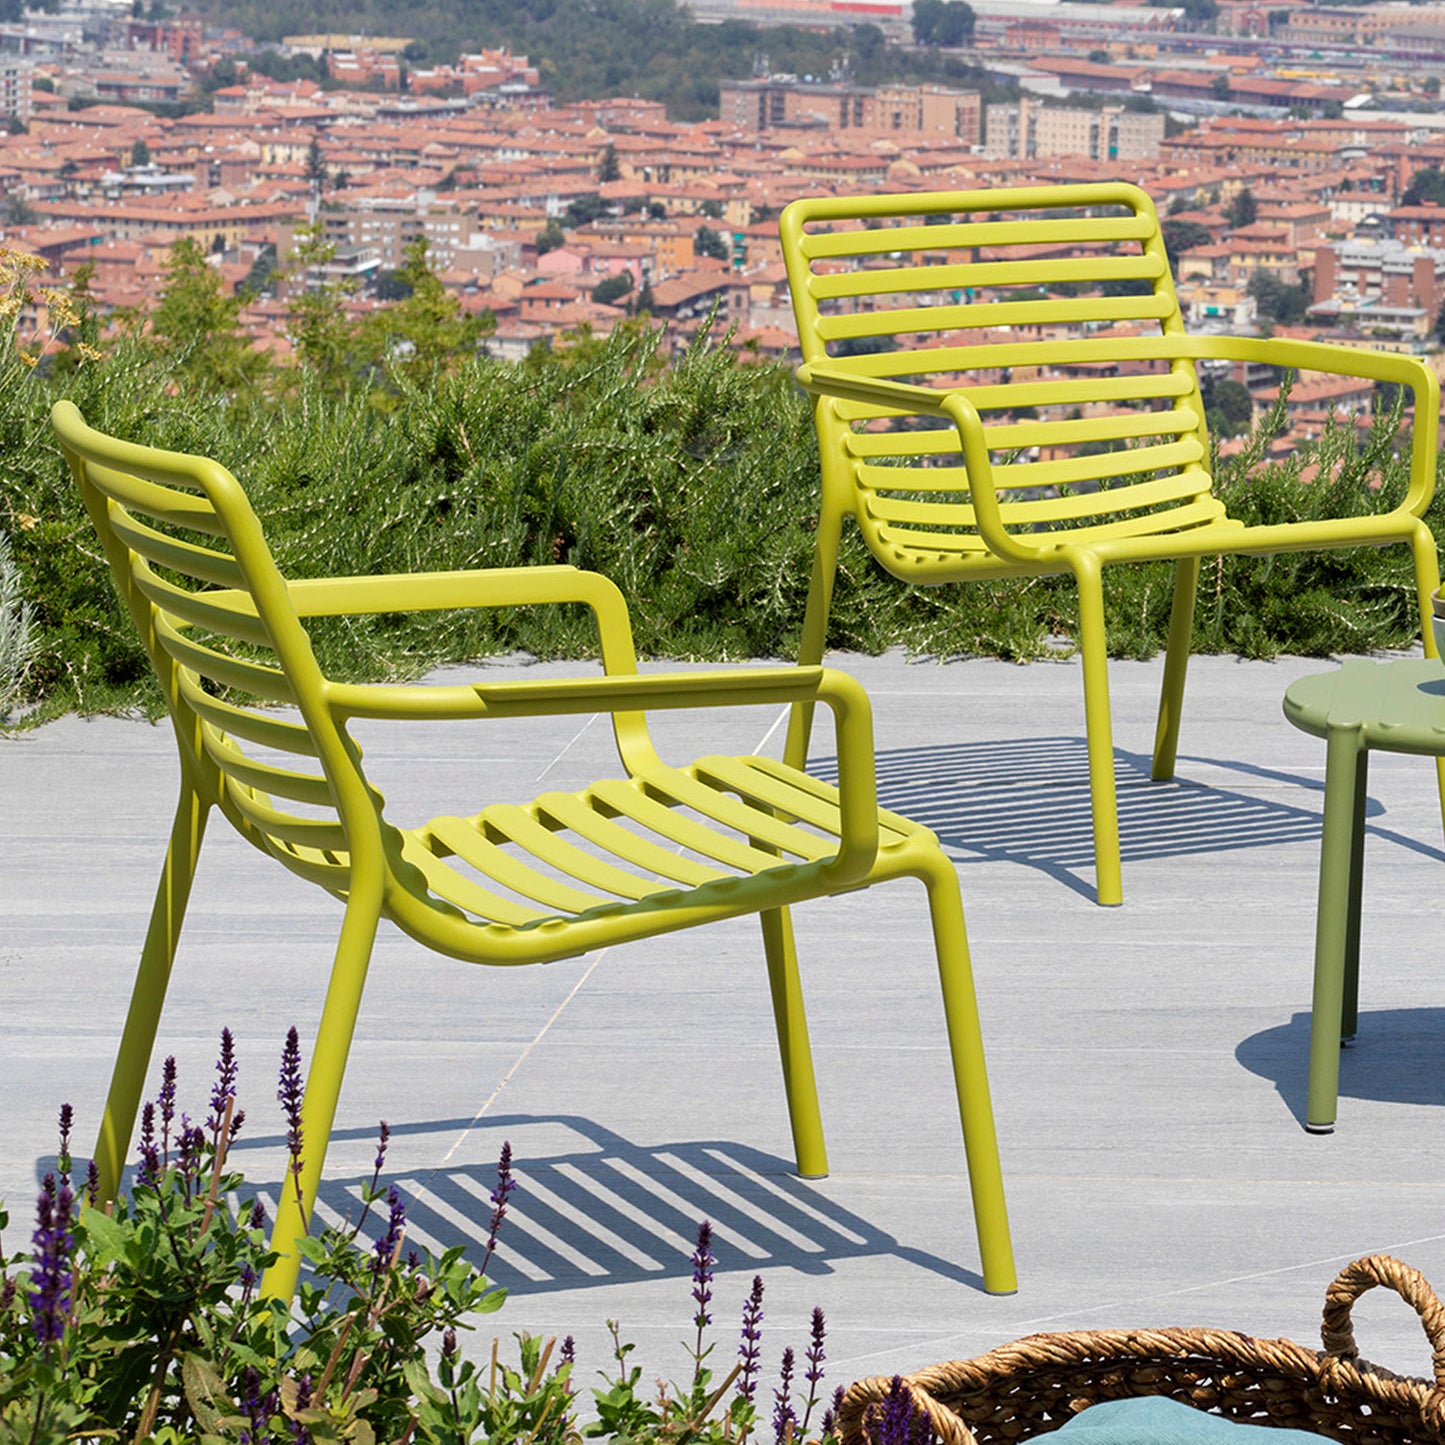 Doga Relax Garden Chair By Nardi - Set Of 4